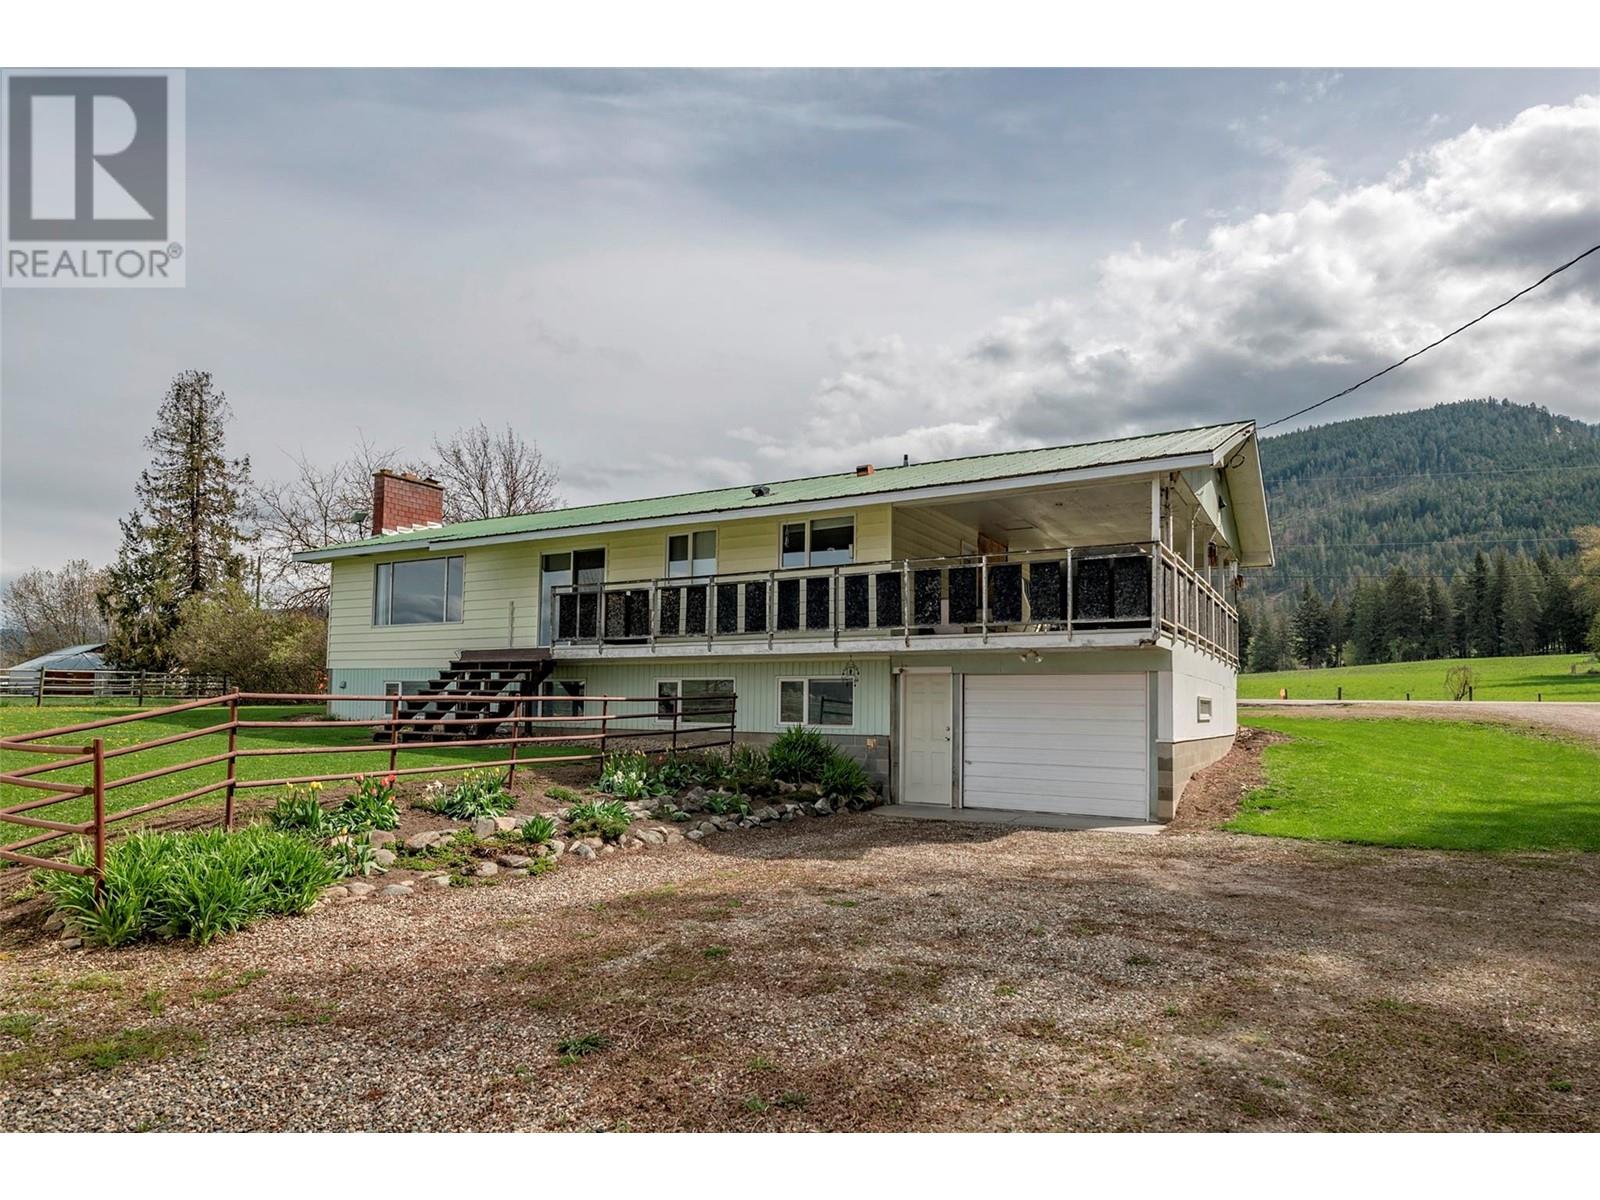  1121 Mountain View Road, Armstrong